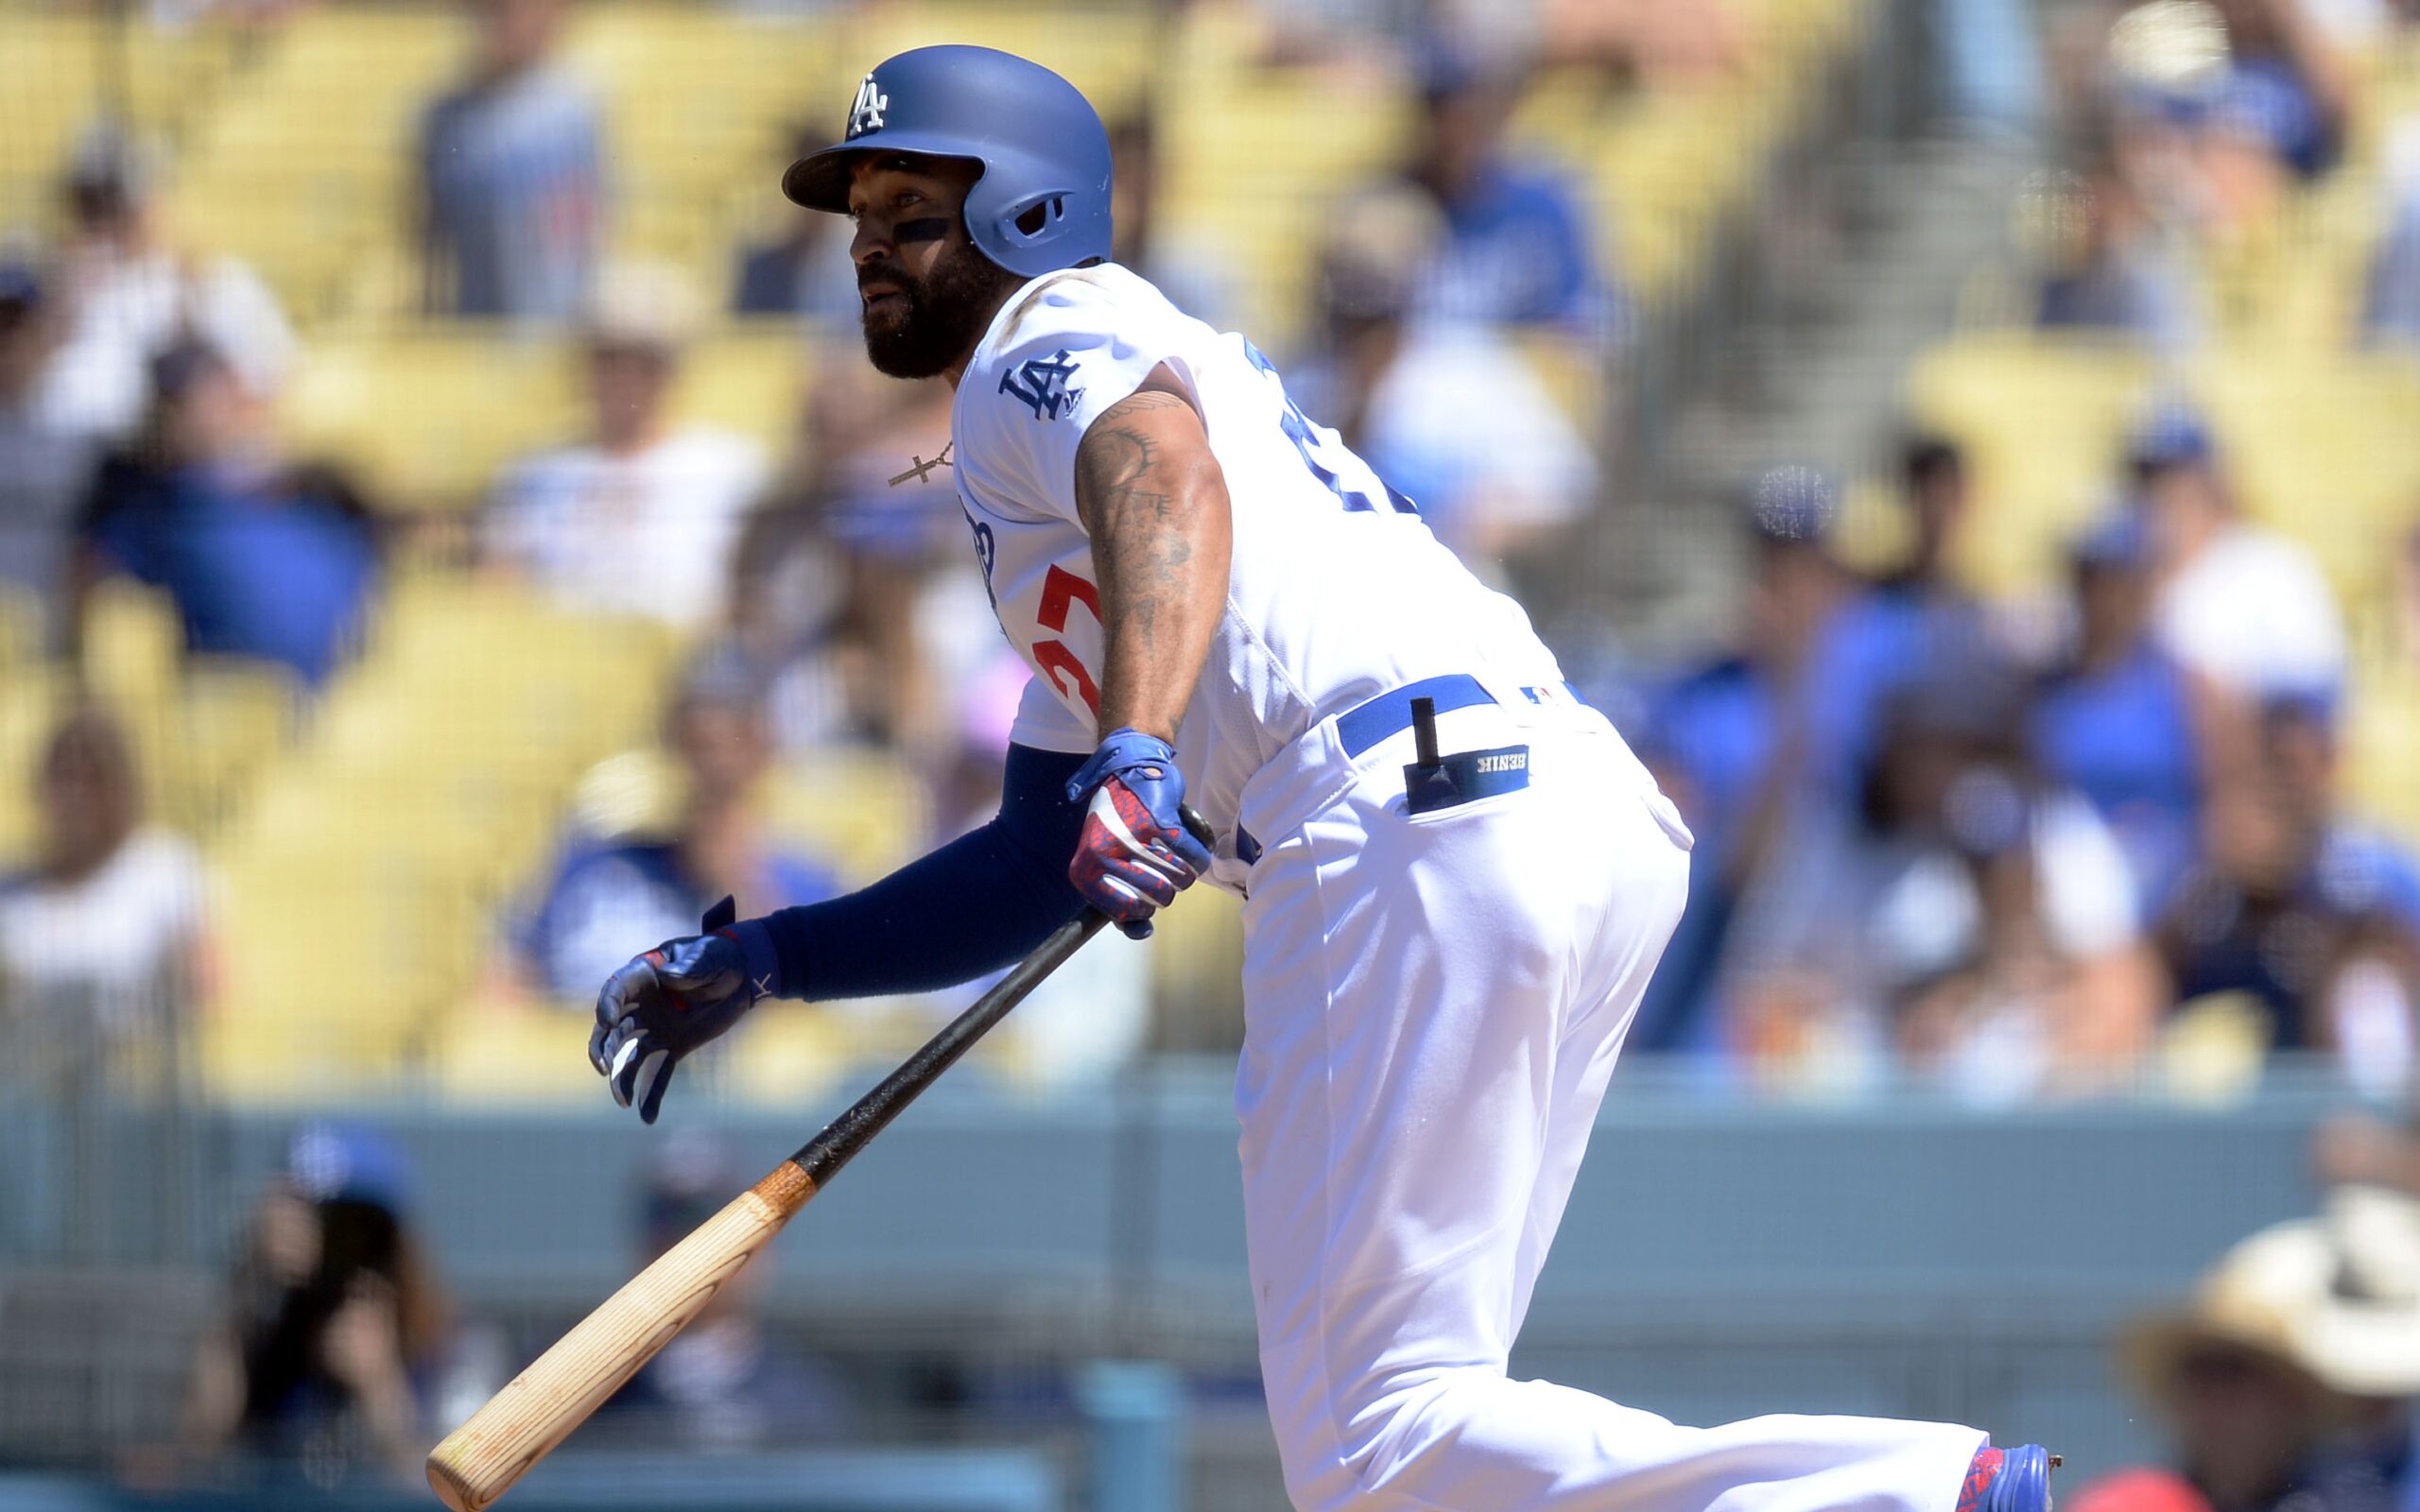 Matt Kemp eager to get career back on track with Rockies - Mile